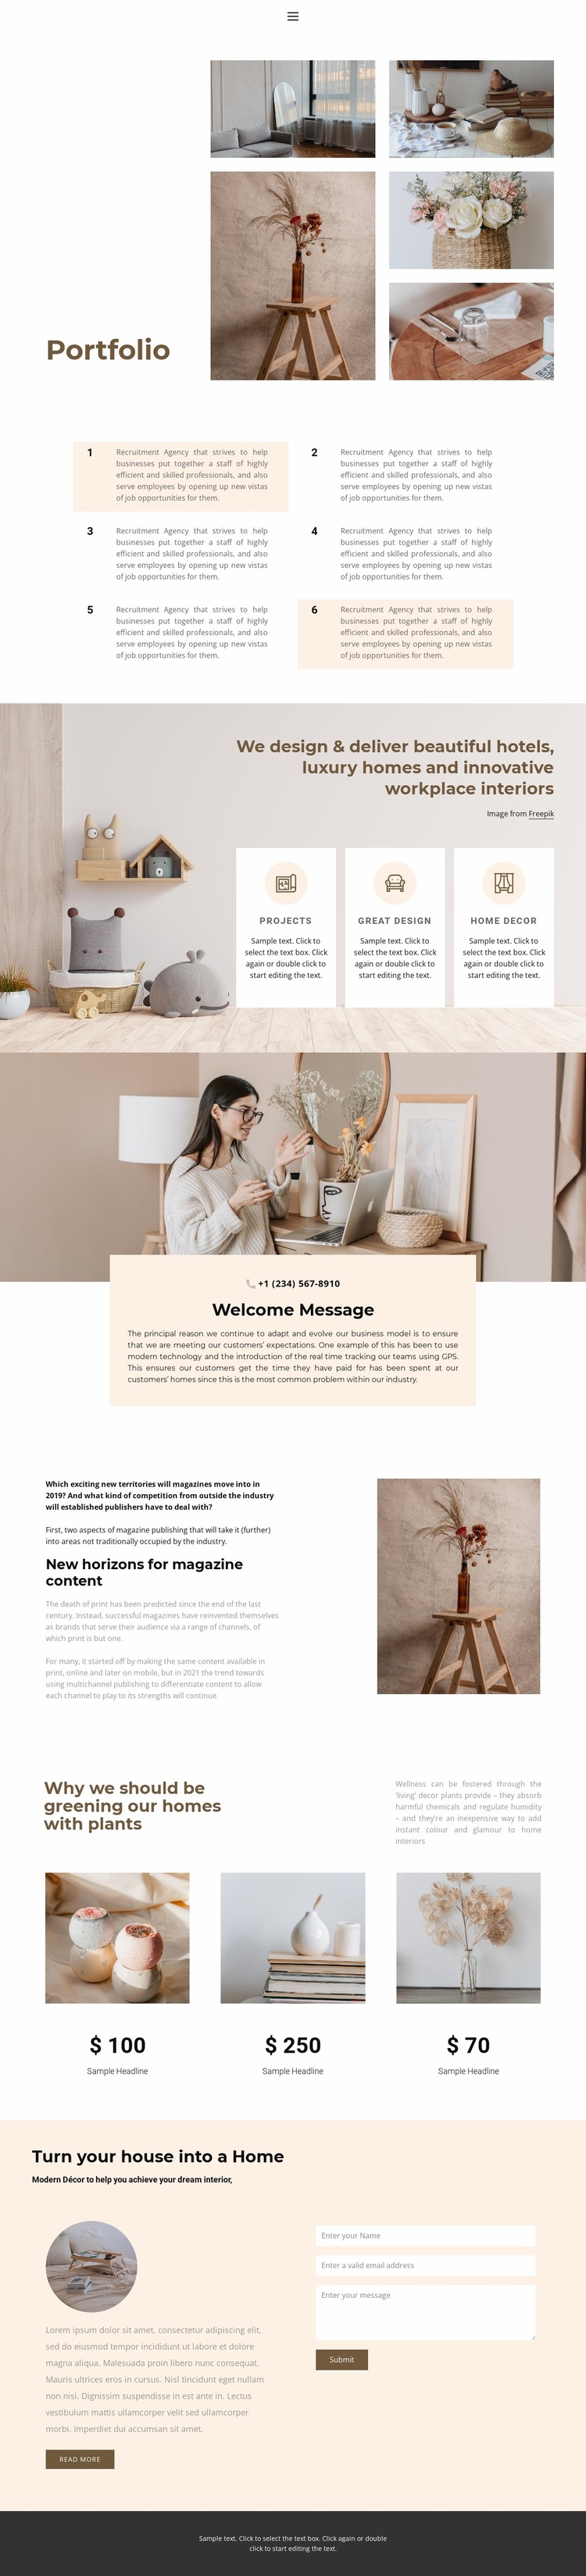 Decorate your home Website Design